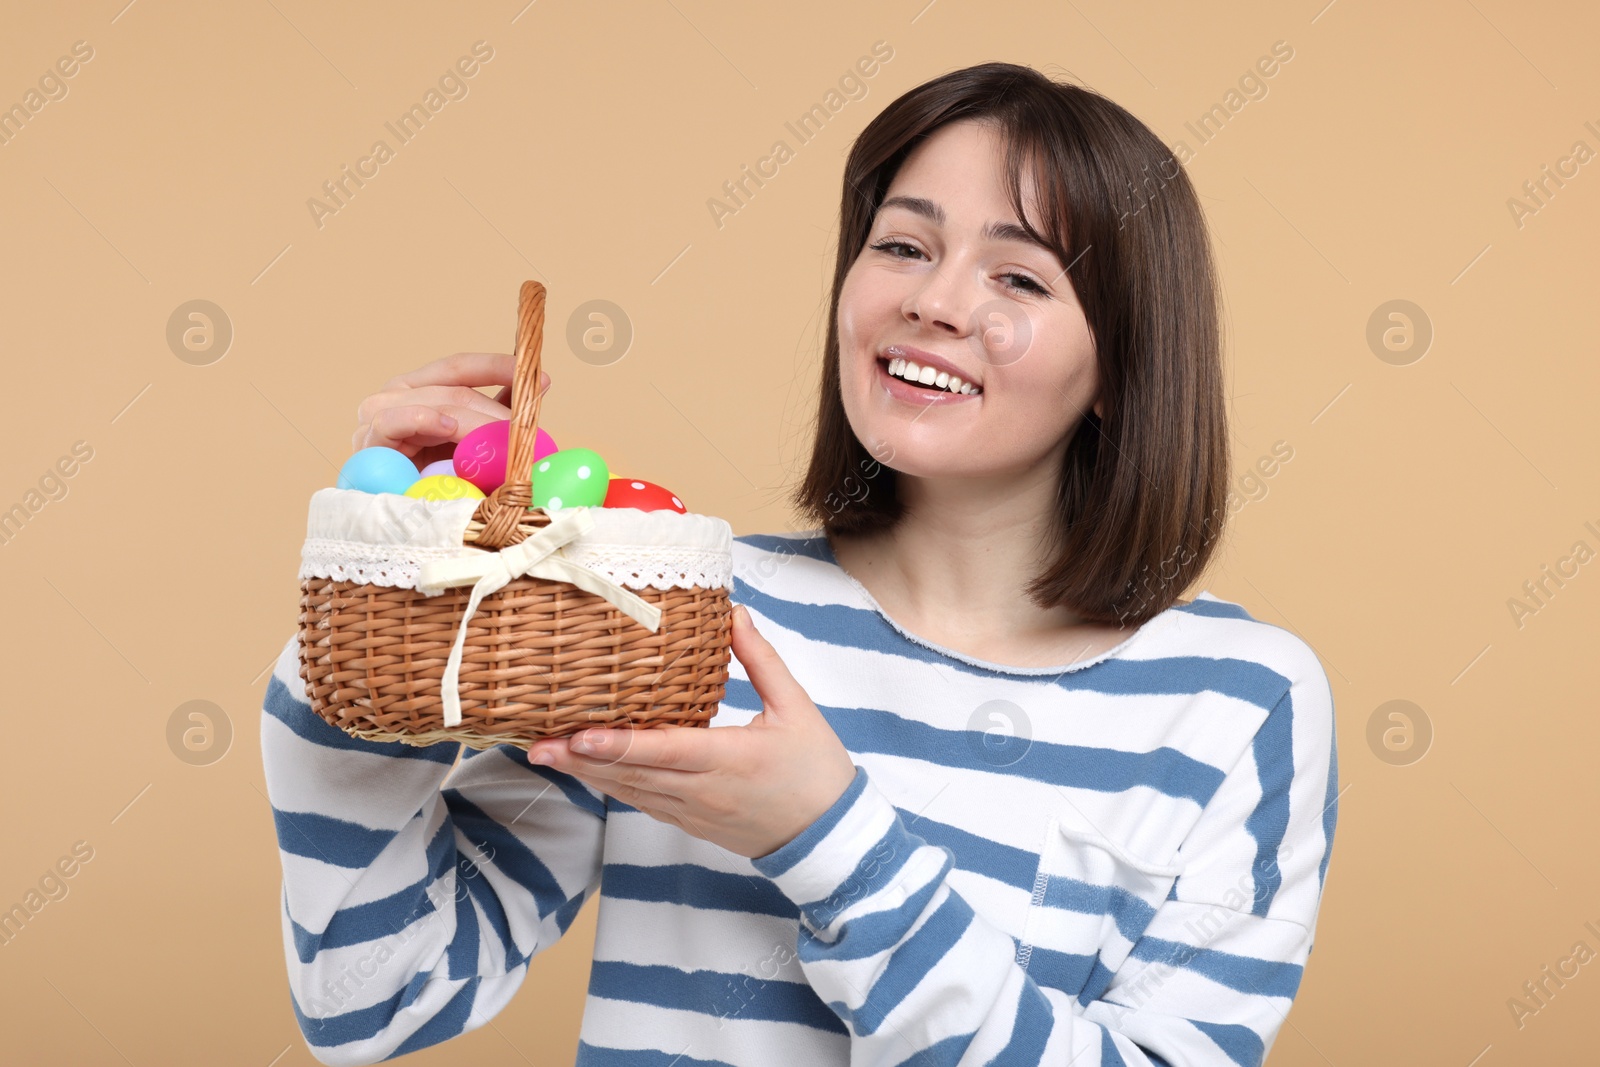 Photo of Easter celebration. Happy woman with wicker basket full of painted eggs on beige background